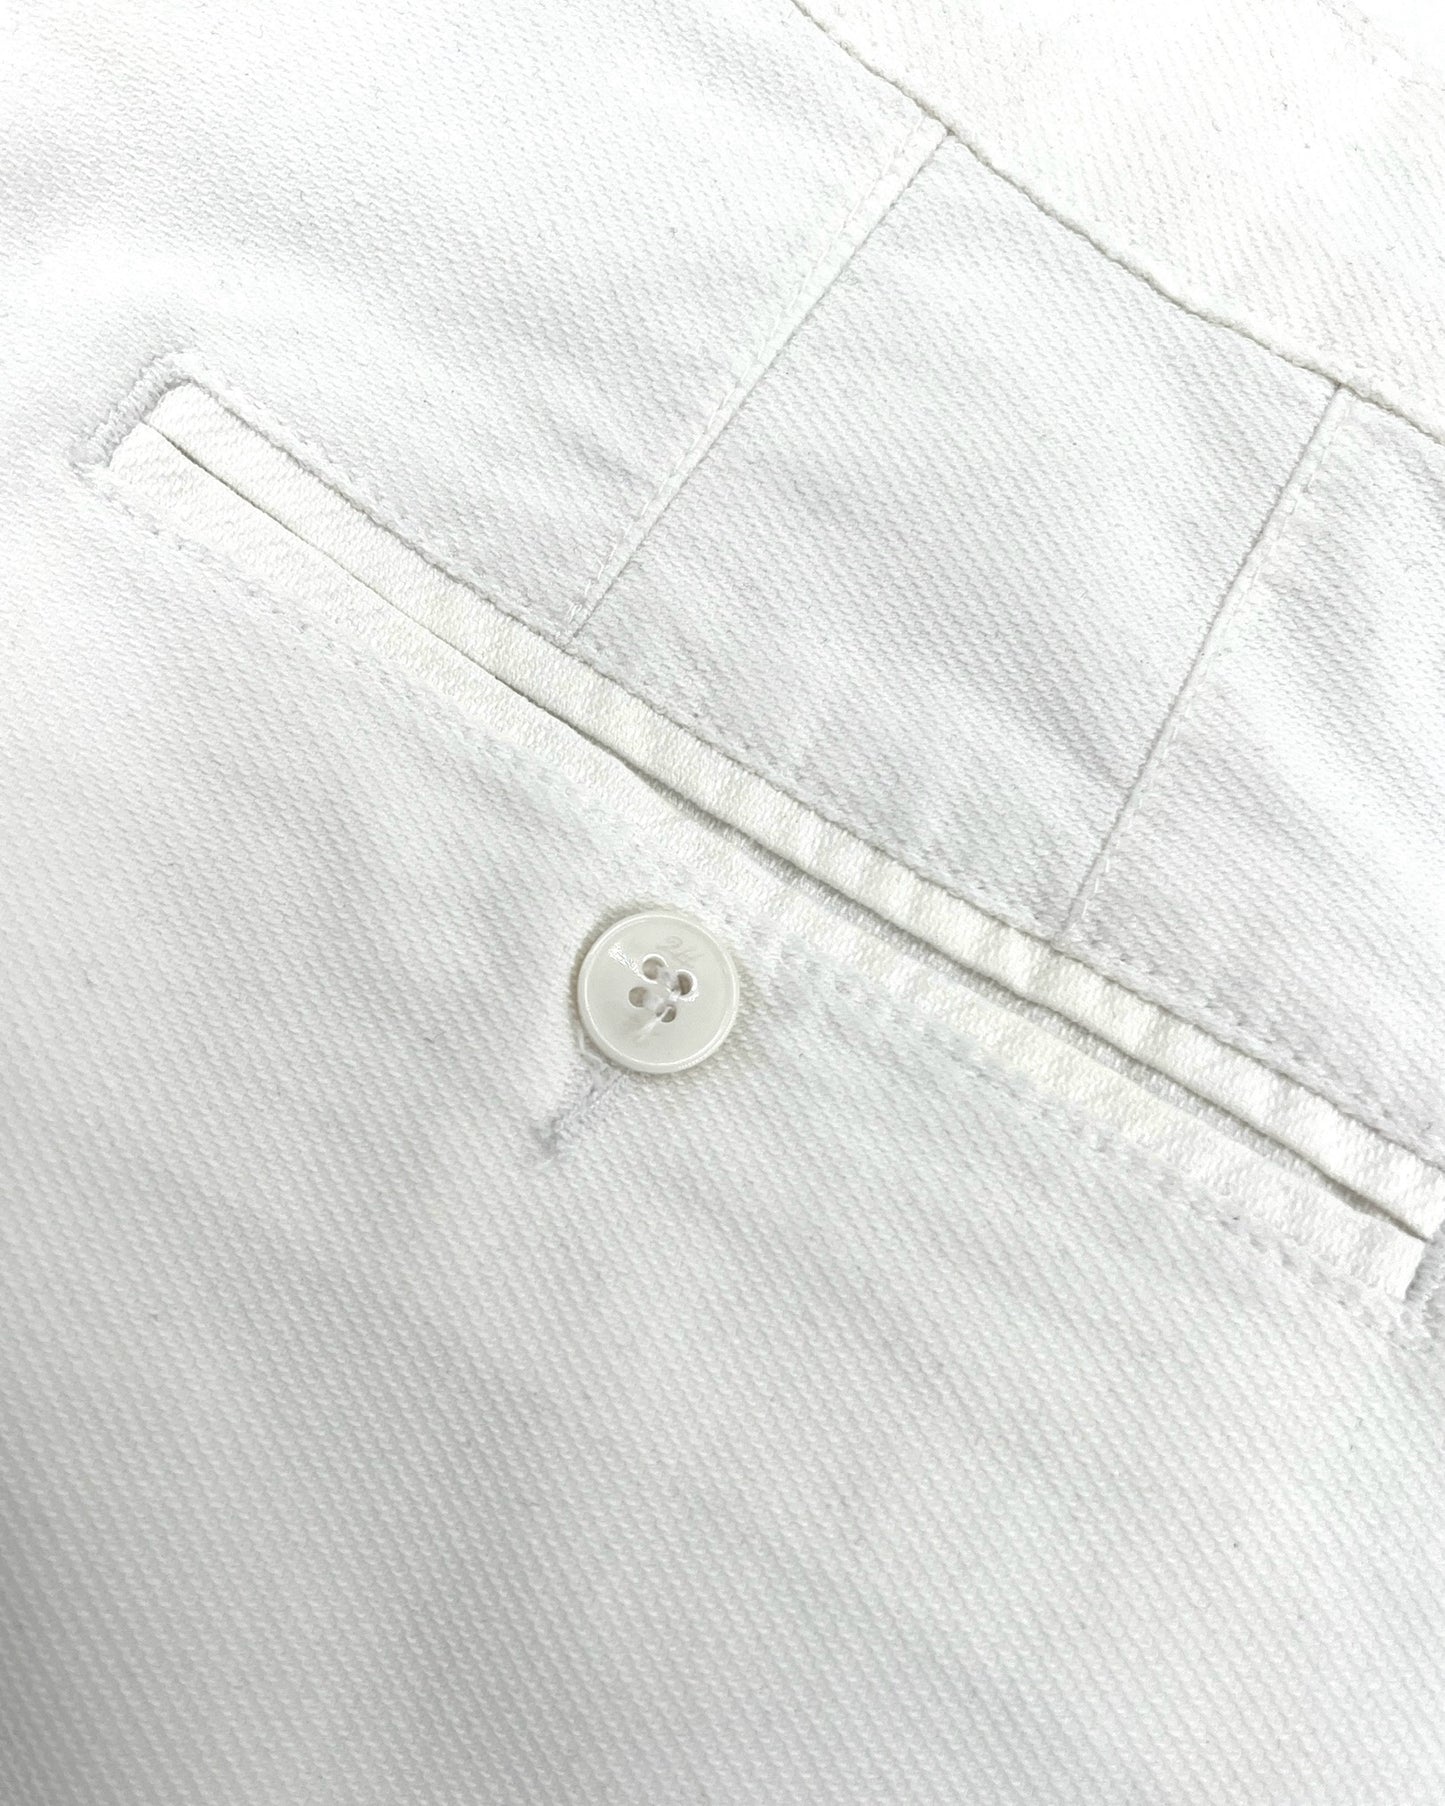 2H White Cotton Embossed Chinos Pant